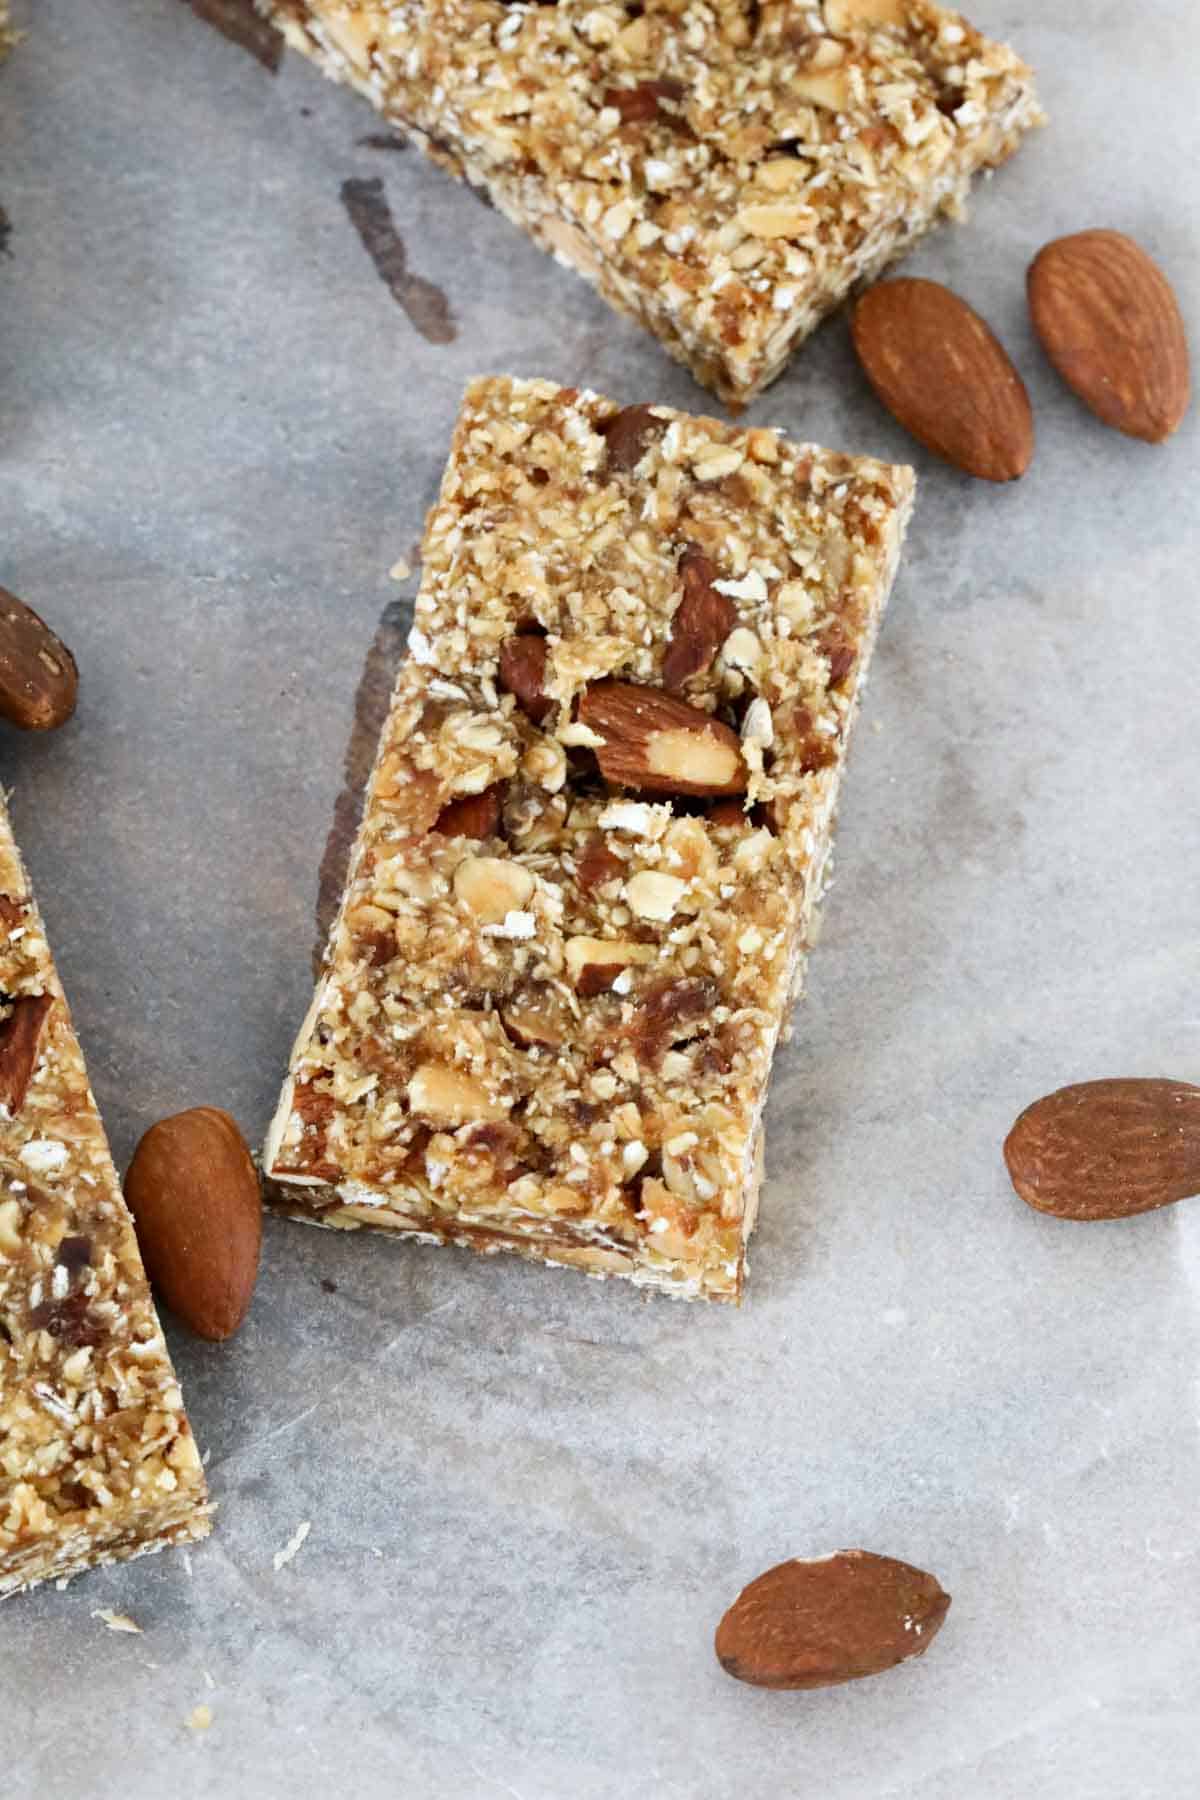 Pieces of date protein bars and roasted almonds on baking paper.